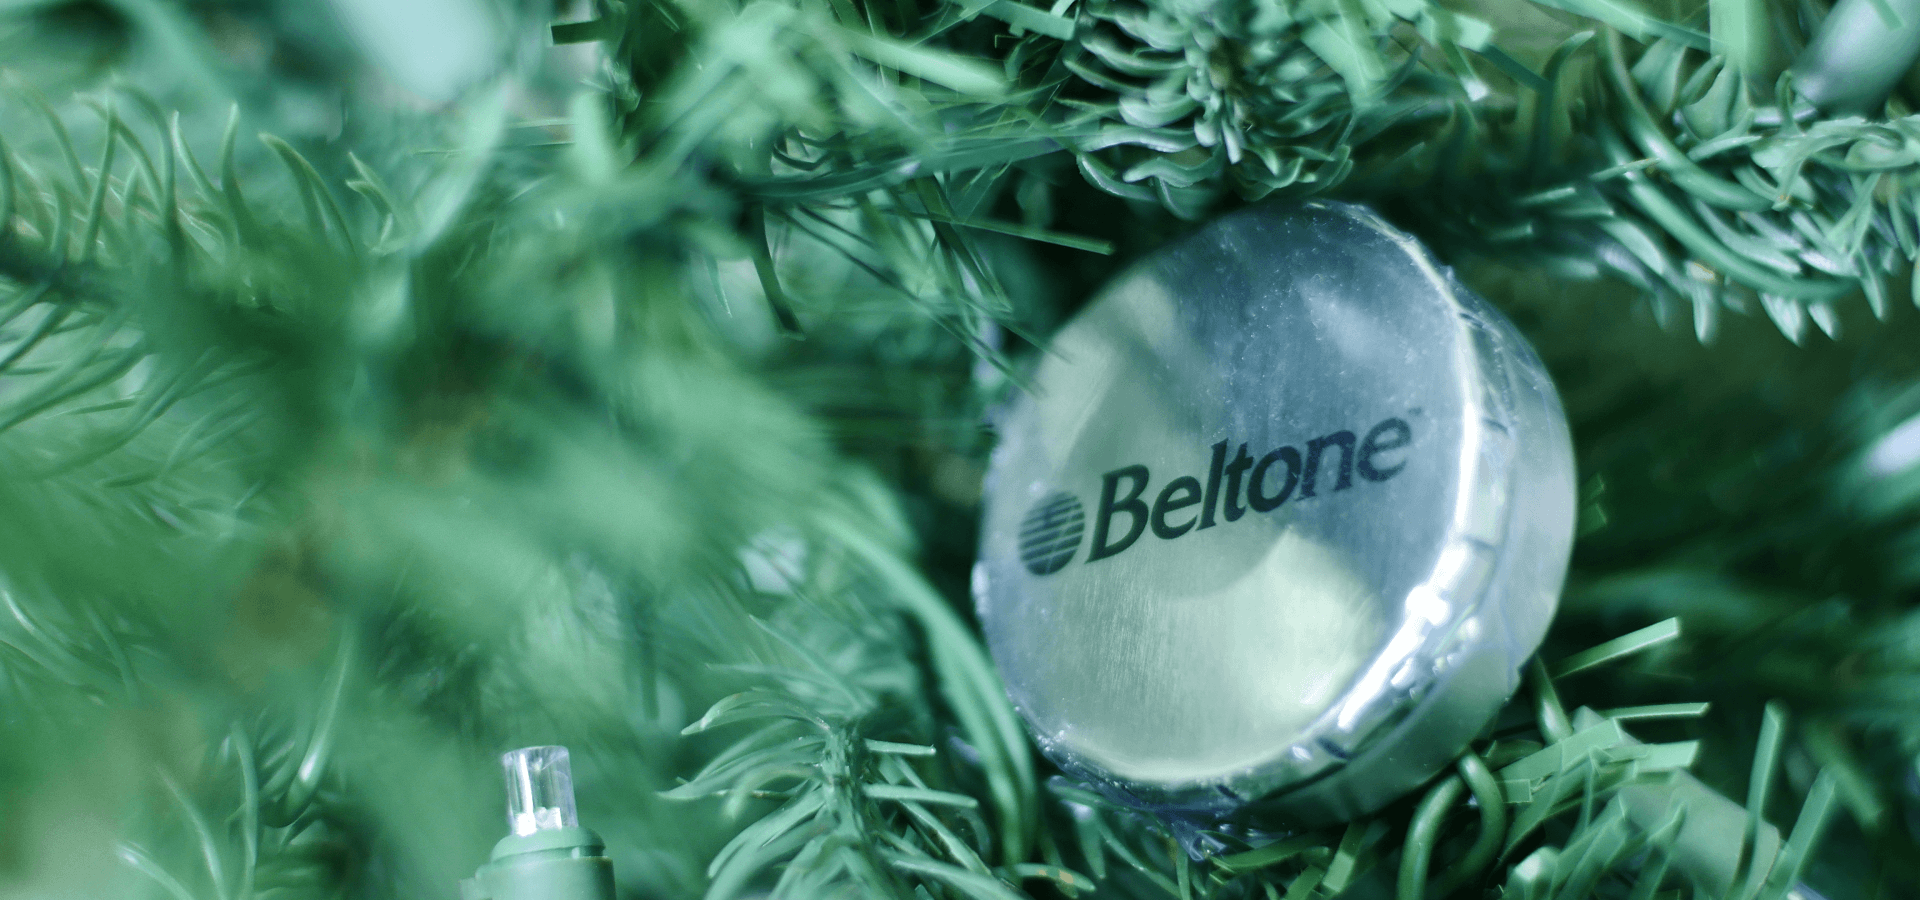 Close up picture of a Christmas truee with the Beltone logo